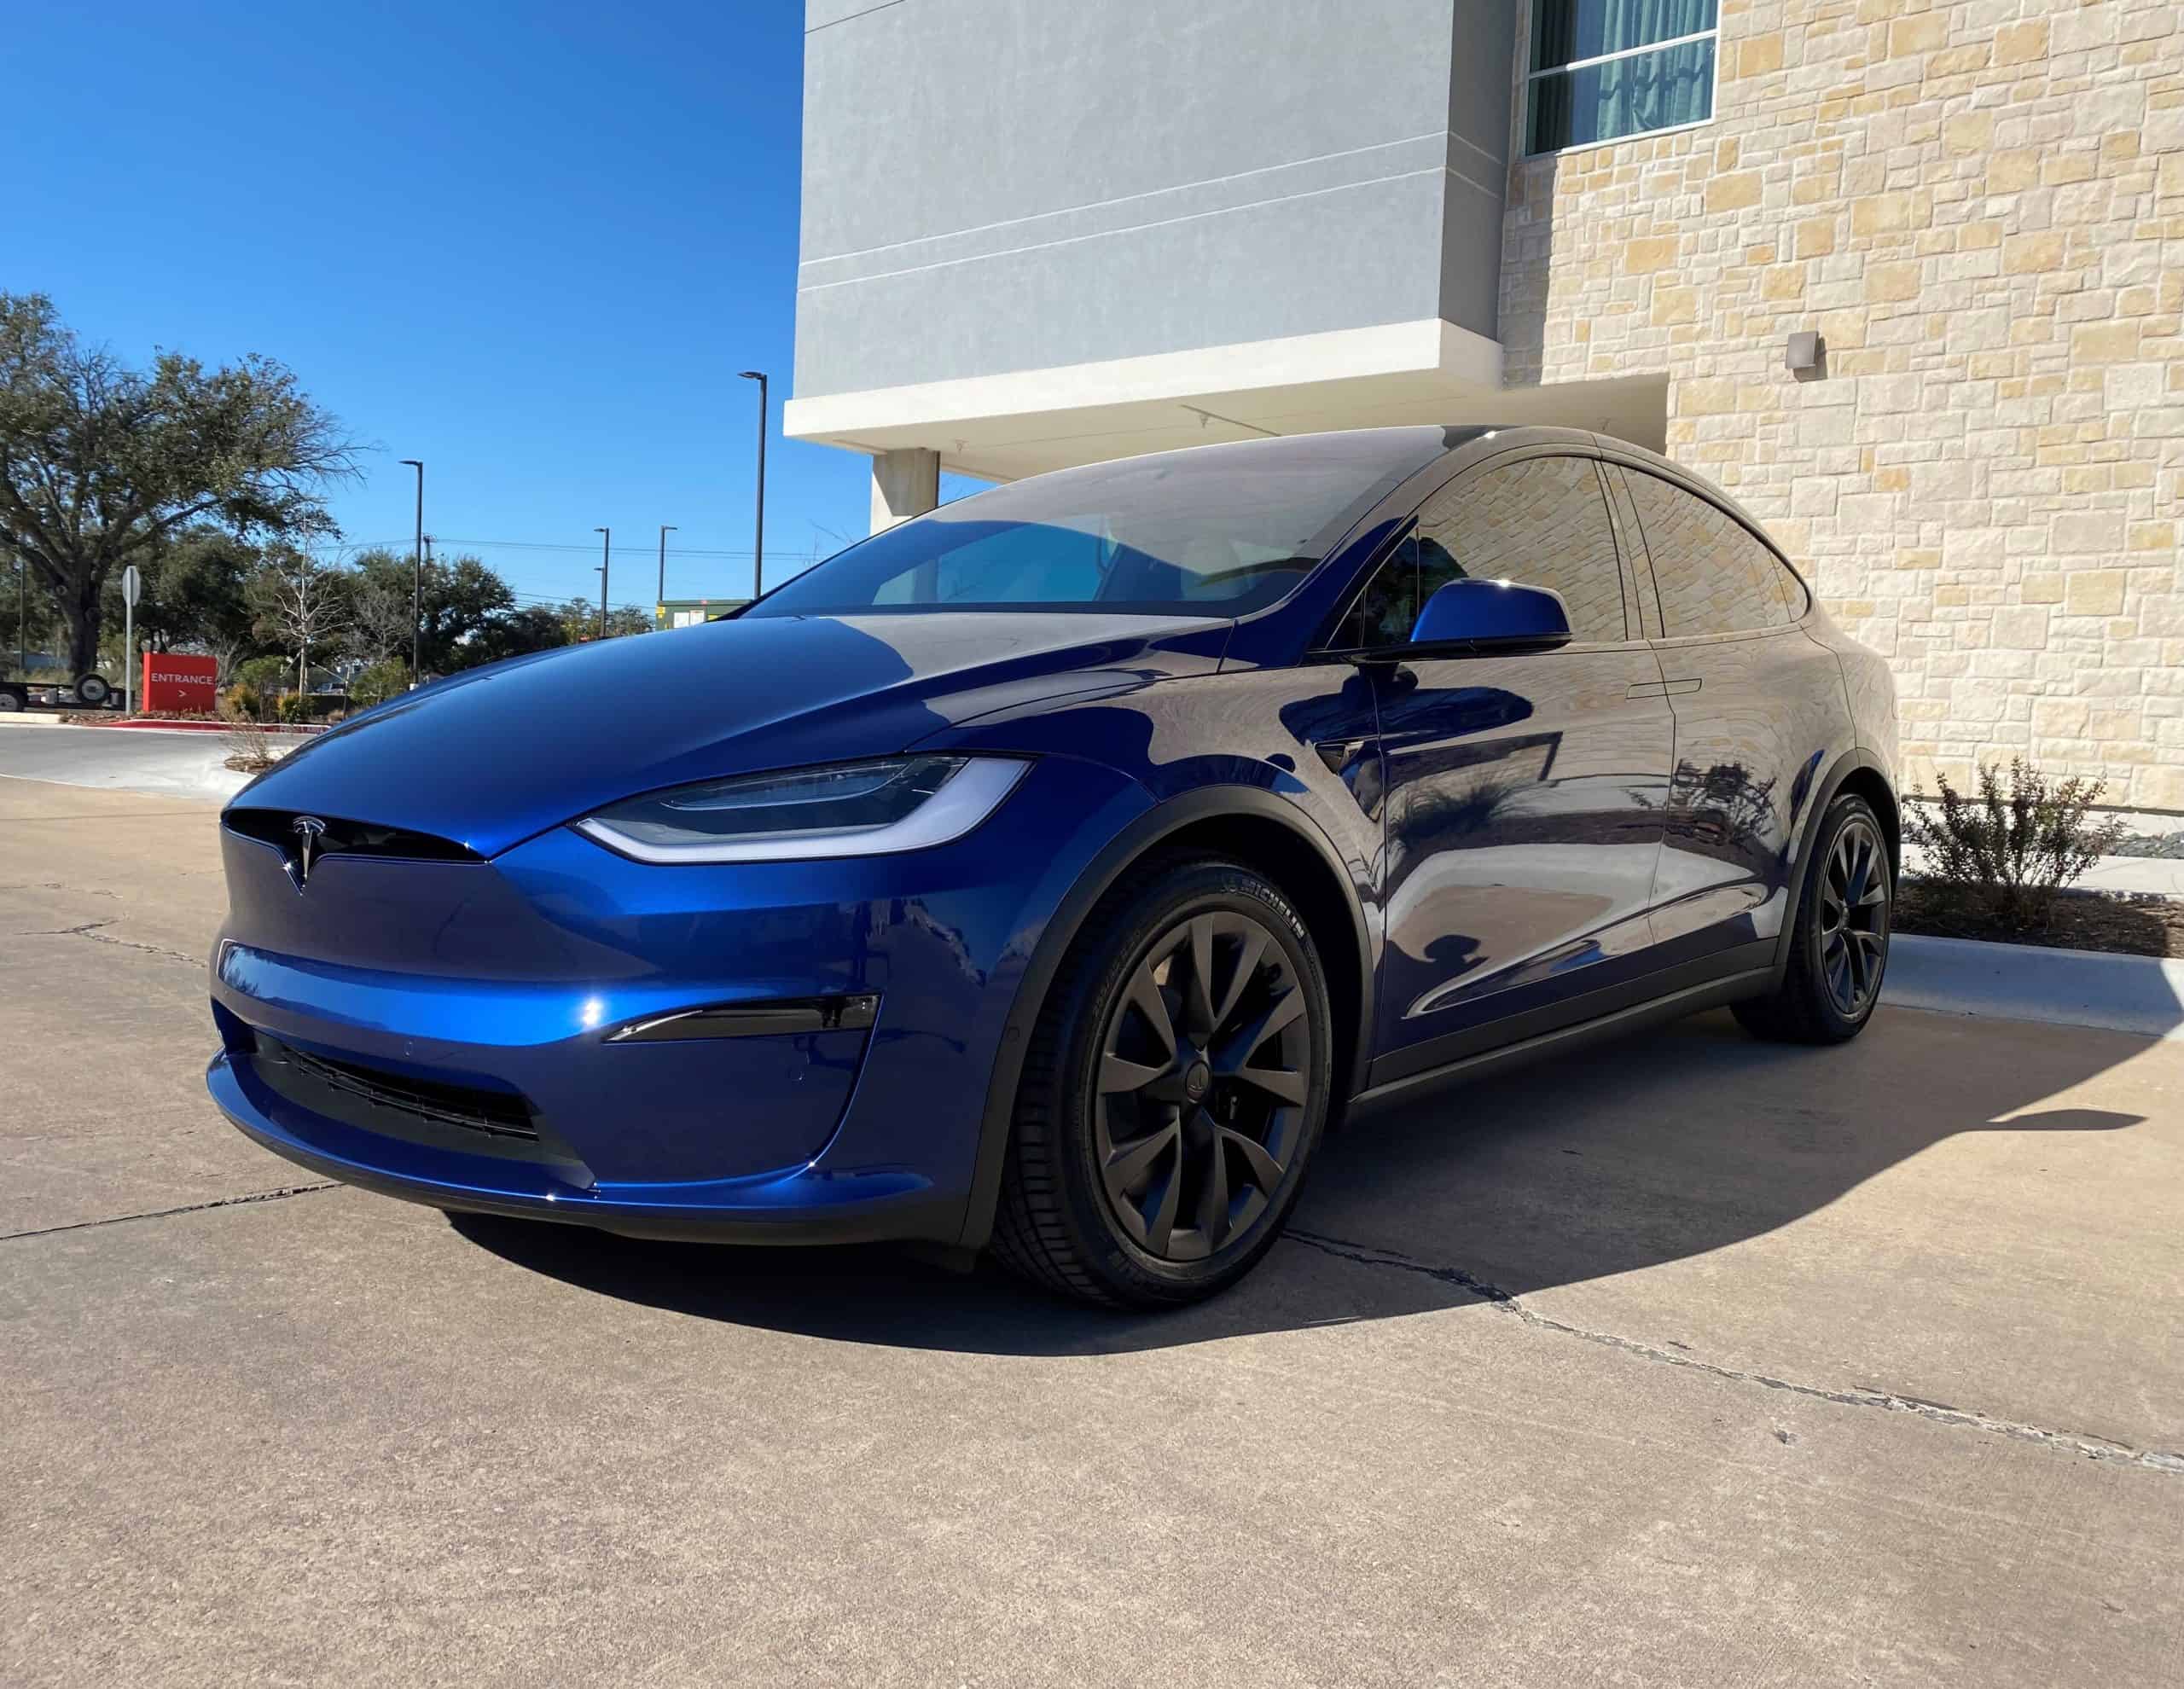 Tint the windows of your Tesla Model 3 with XPEL XR film - Tesland